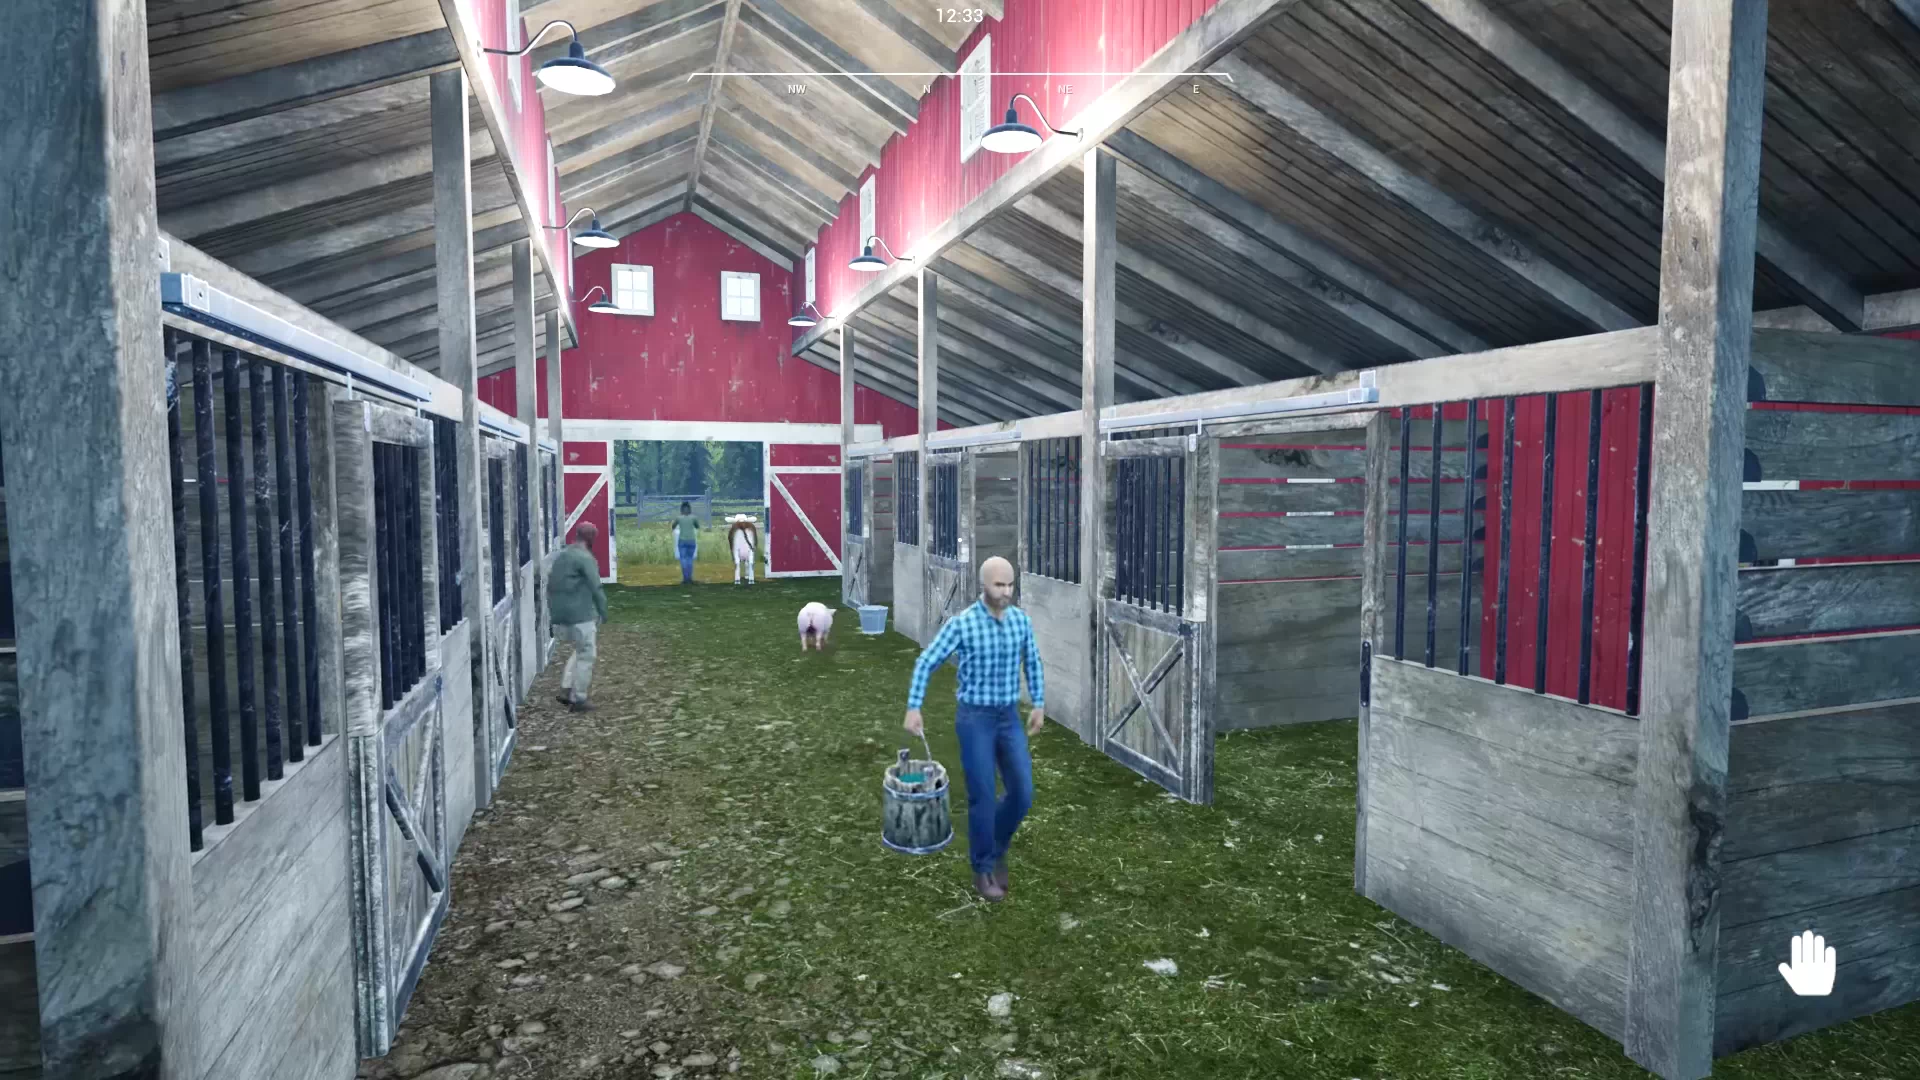 Download Ranch Simulator For Free For PC, 100%Working, No Clickbait, Menon Gaming., ✔️Remember to subscribe✔️ #Ranch Simulator #menongaming  #downloaRanchSimulatorforpc #downloadfreegamesforPC #menon #gaming  #trending #downloadRanch